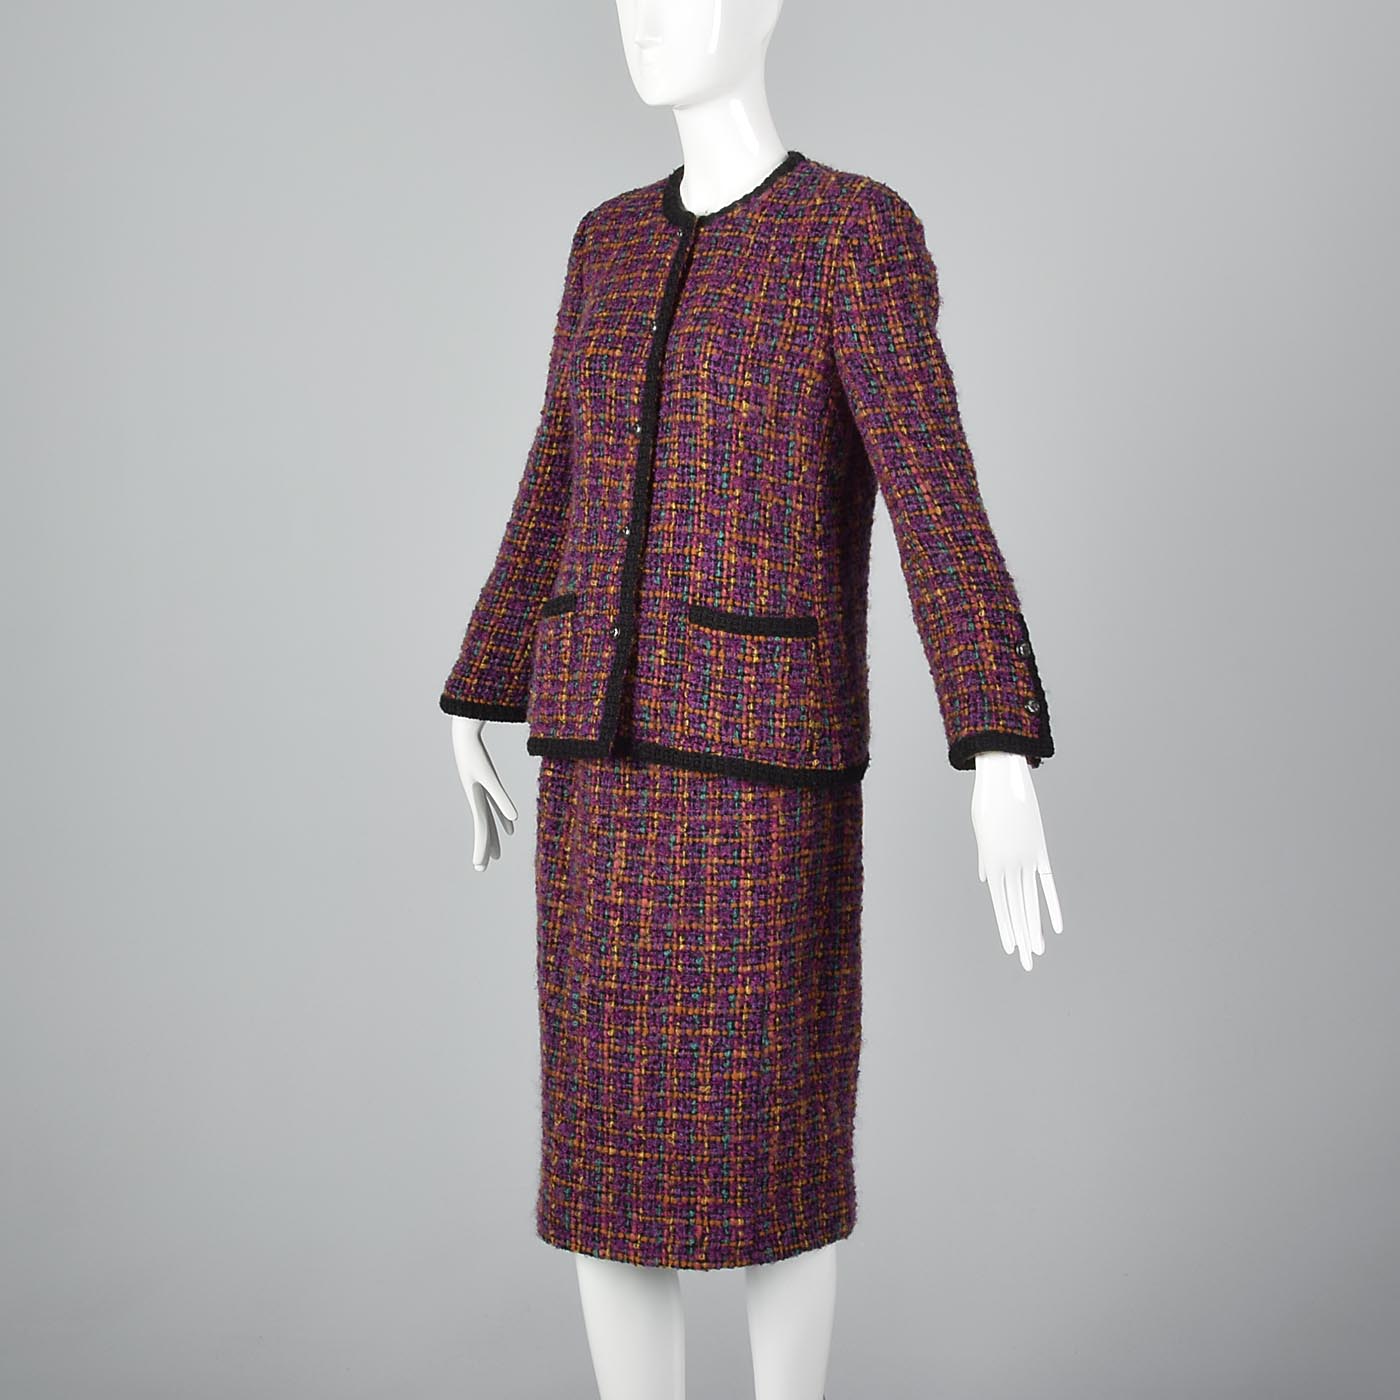 Classic Chanel Pink Tweed Skirt Suit